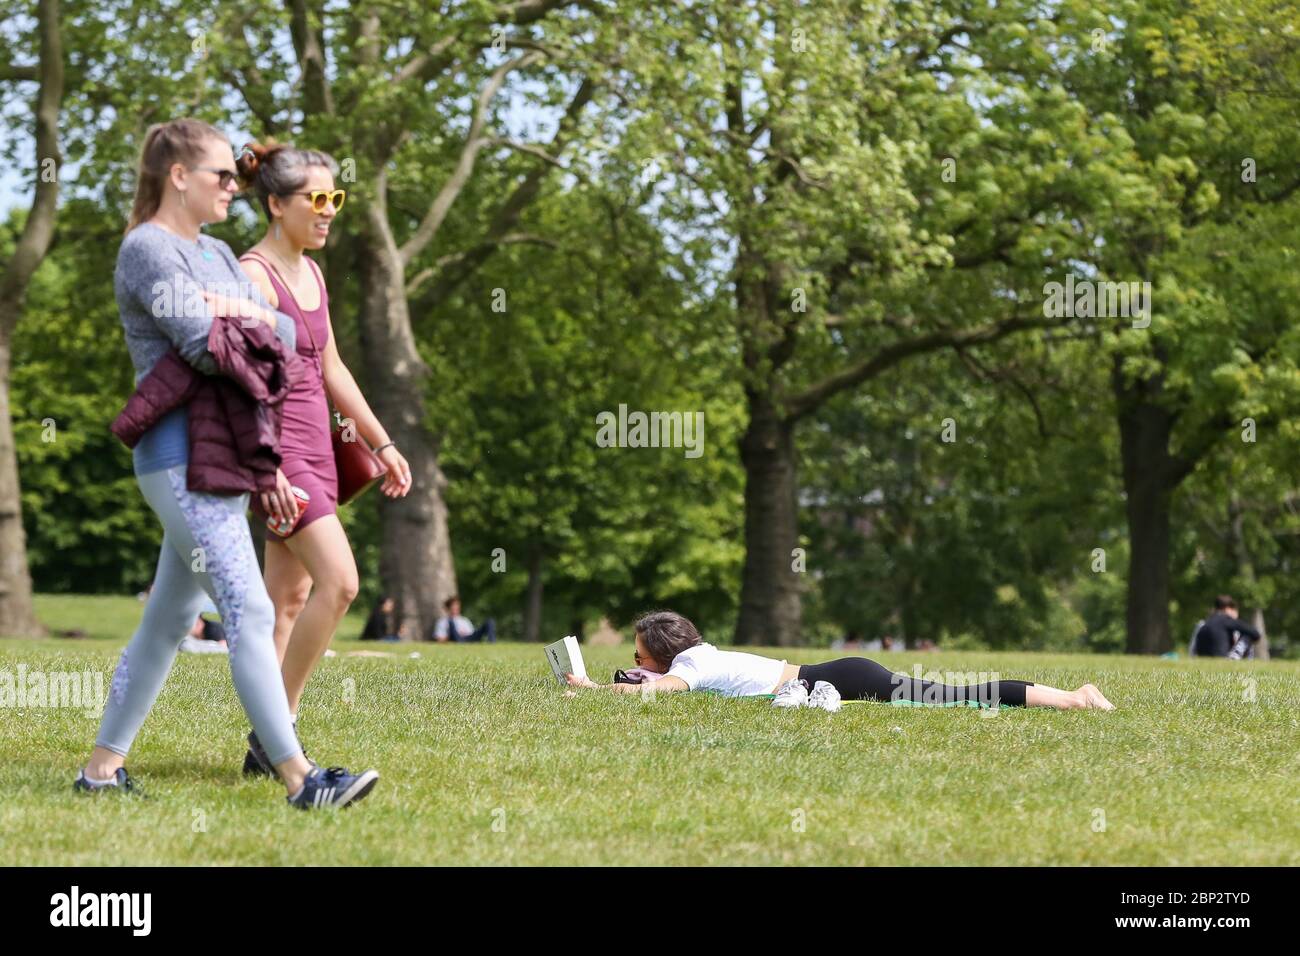 London, UK 17 May 2020 - A woman reads a book in Finsbury Park, north London on the first weekend since the government relaxed the rules on the COVID-19 lockdown, allowing people to spend more time outdoors whilst following social distancing guidelines. According to the Met Office, warmer weather is forecast in the coming week and over the bank holiday weekend.   Credit: Dinendra Haria/Alamy Live News Stock Photo